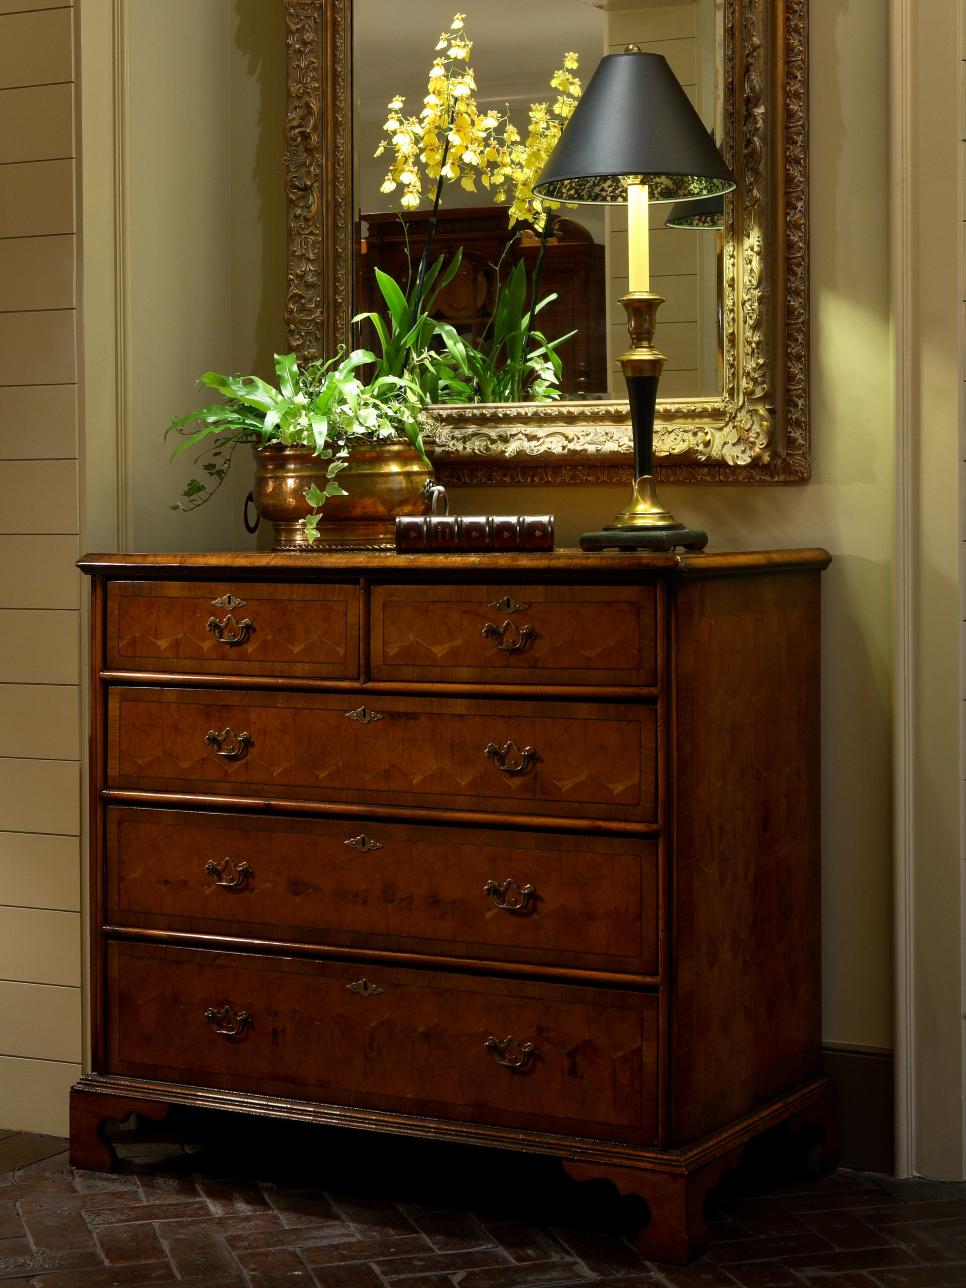 Entryway With Wooden Antique Chest, Brass Lamp and Orchid Arrangement